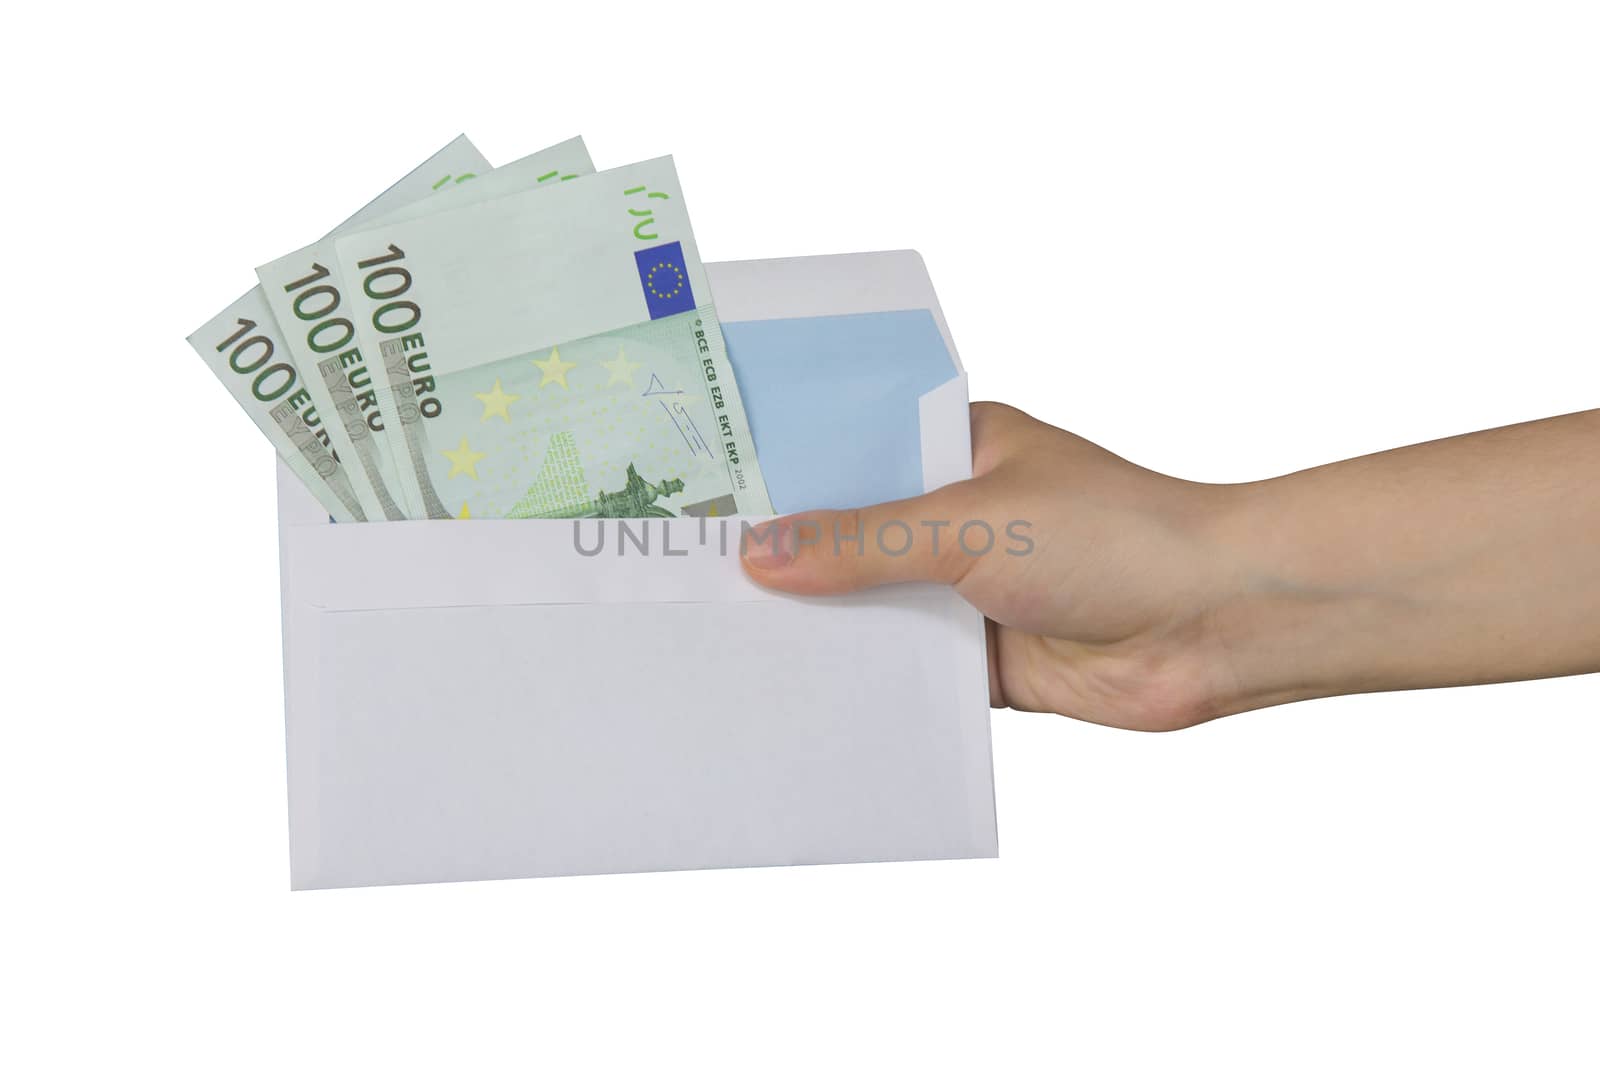 Hand taking an envelope with euros inside